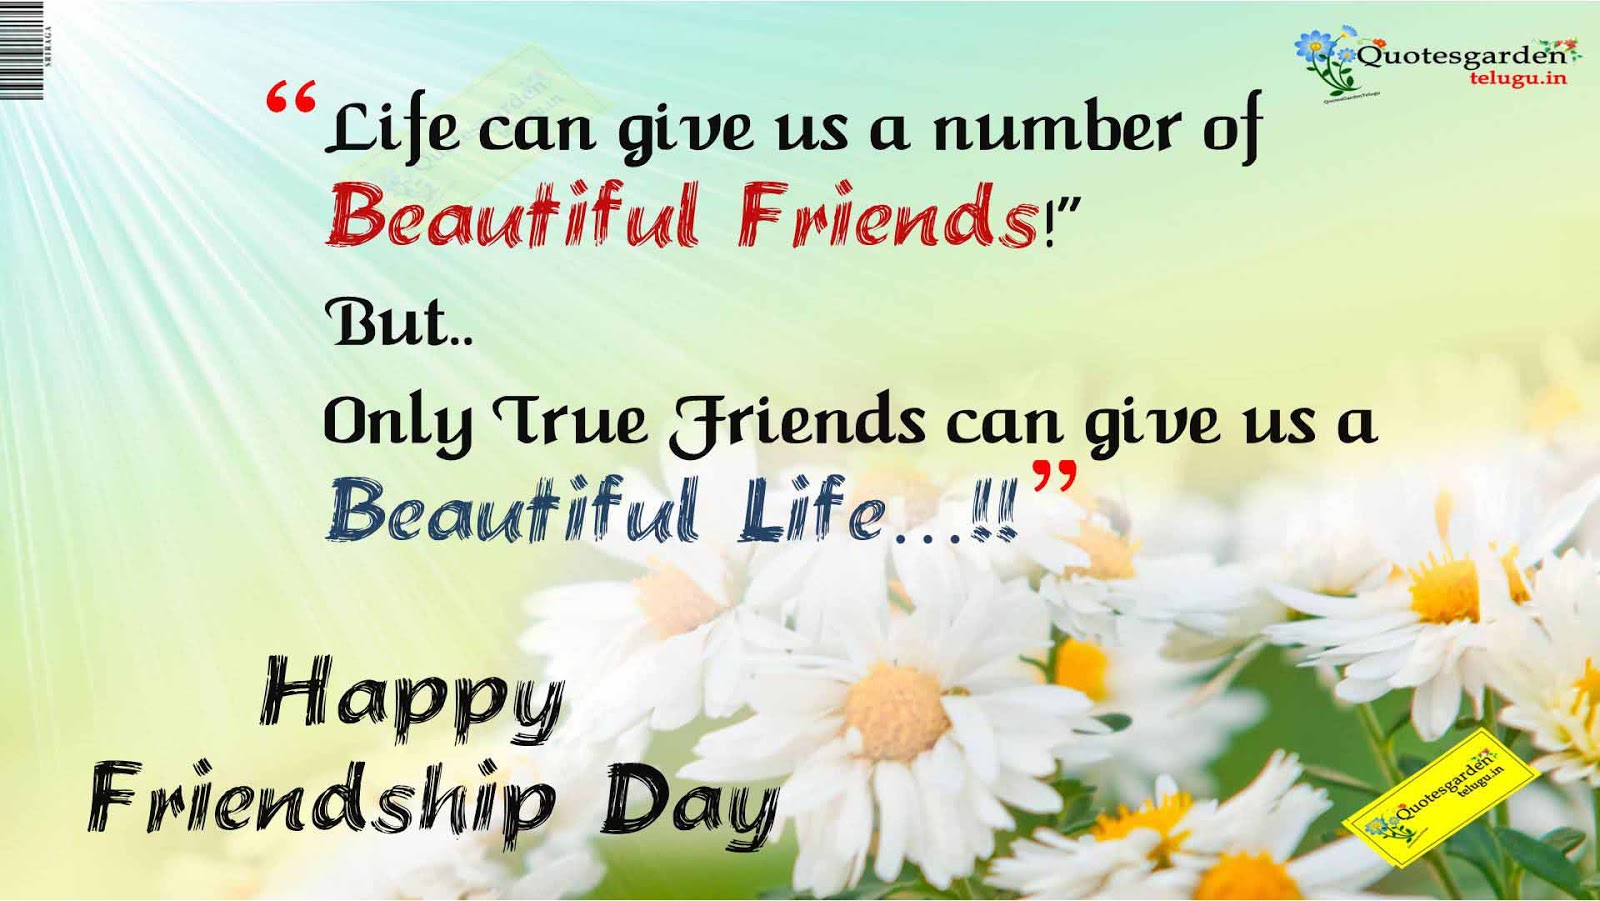 Best Quotes for Friendship Day with HD wallpaper 768. QUOTES GARDEN TELUGU. Telugu Quotes. English Quotes. Hindi Quotes